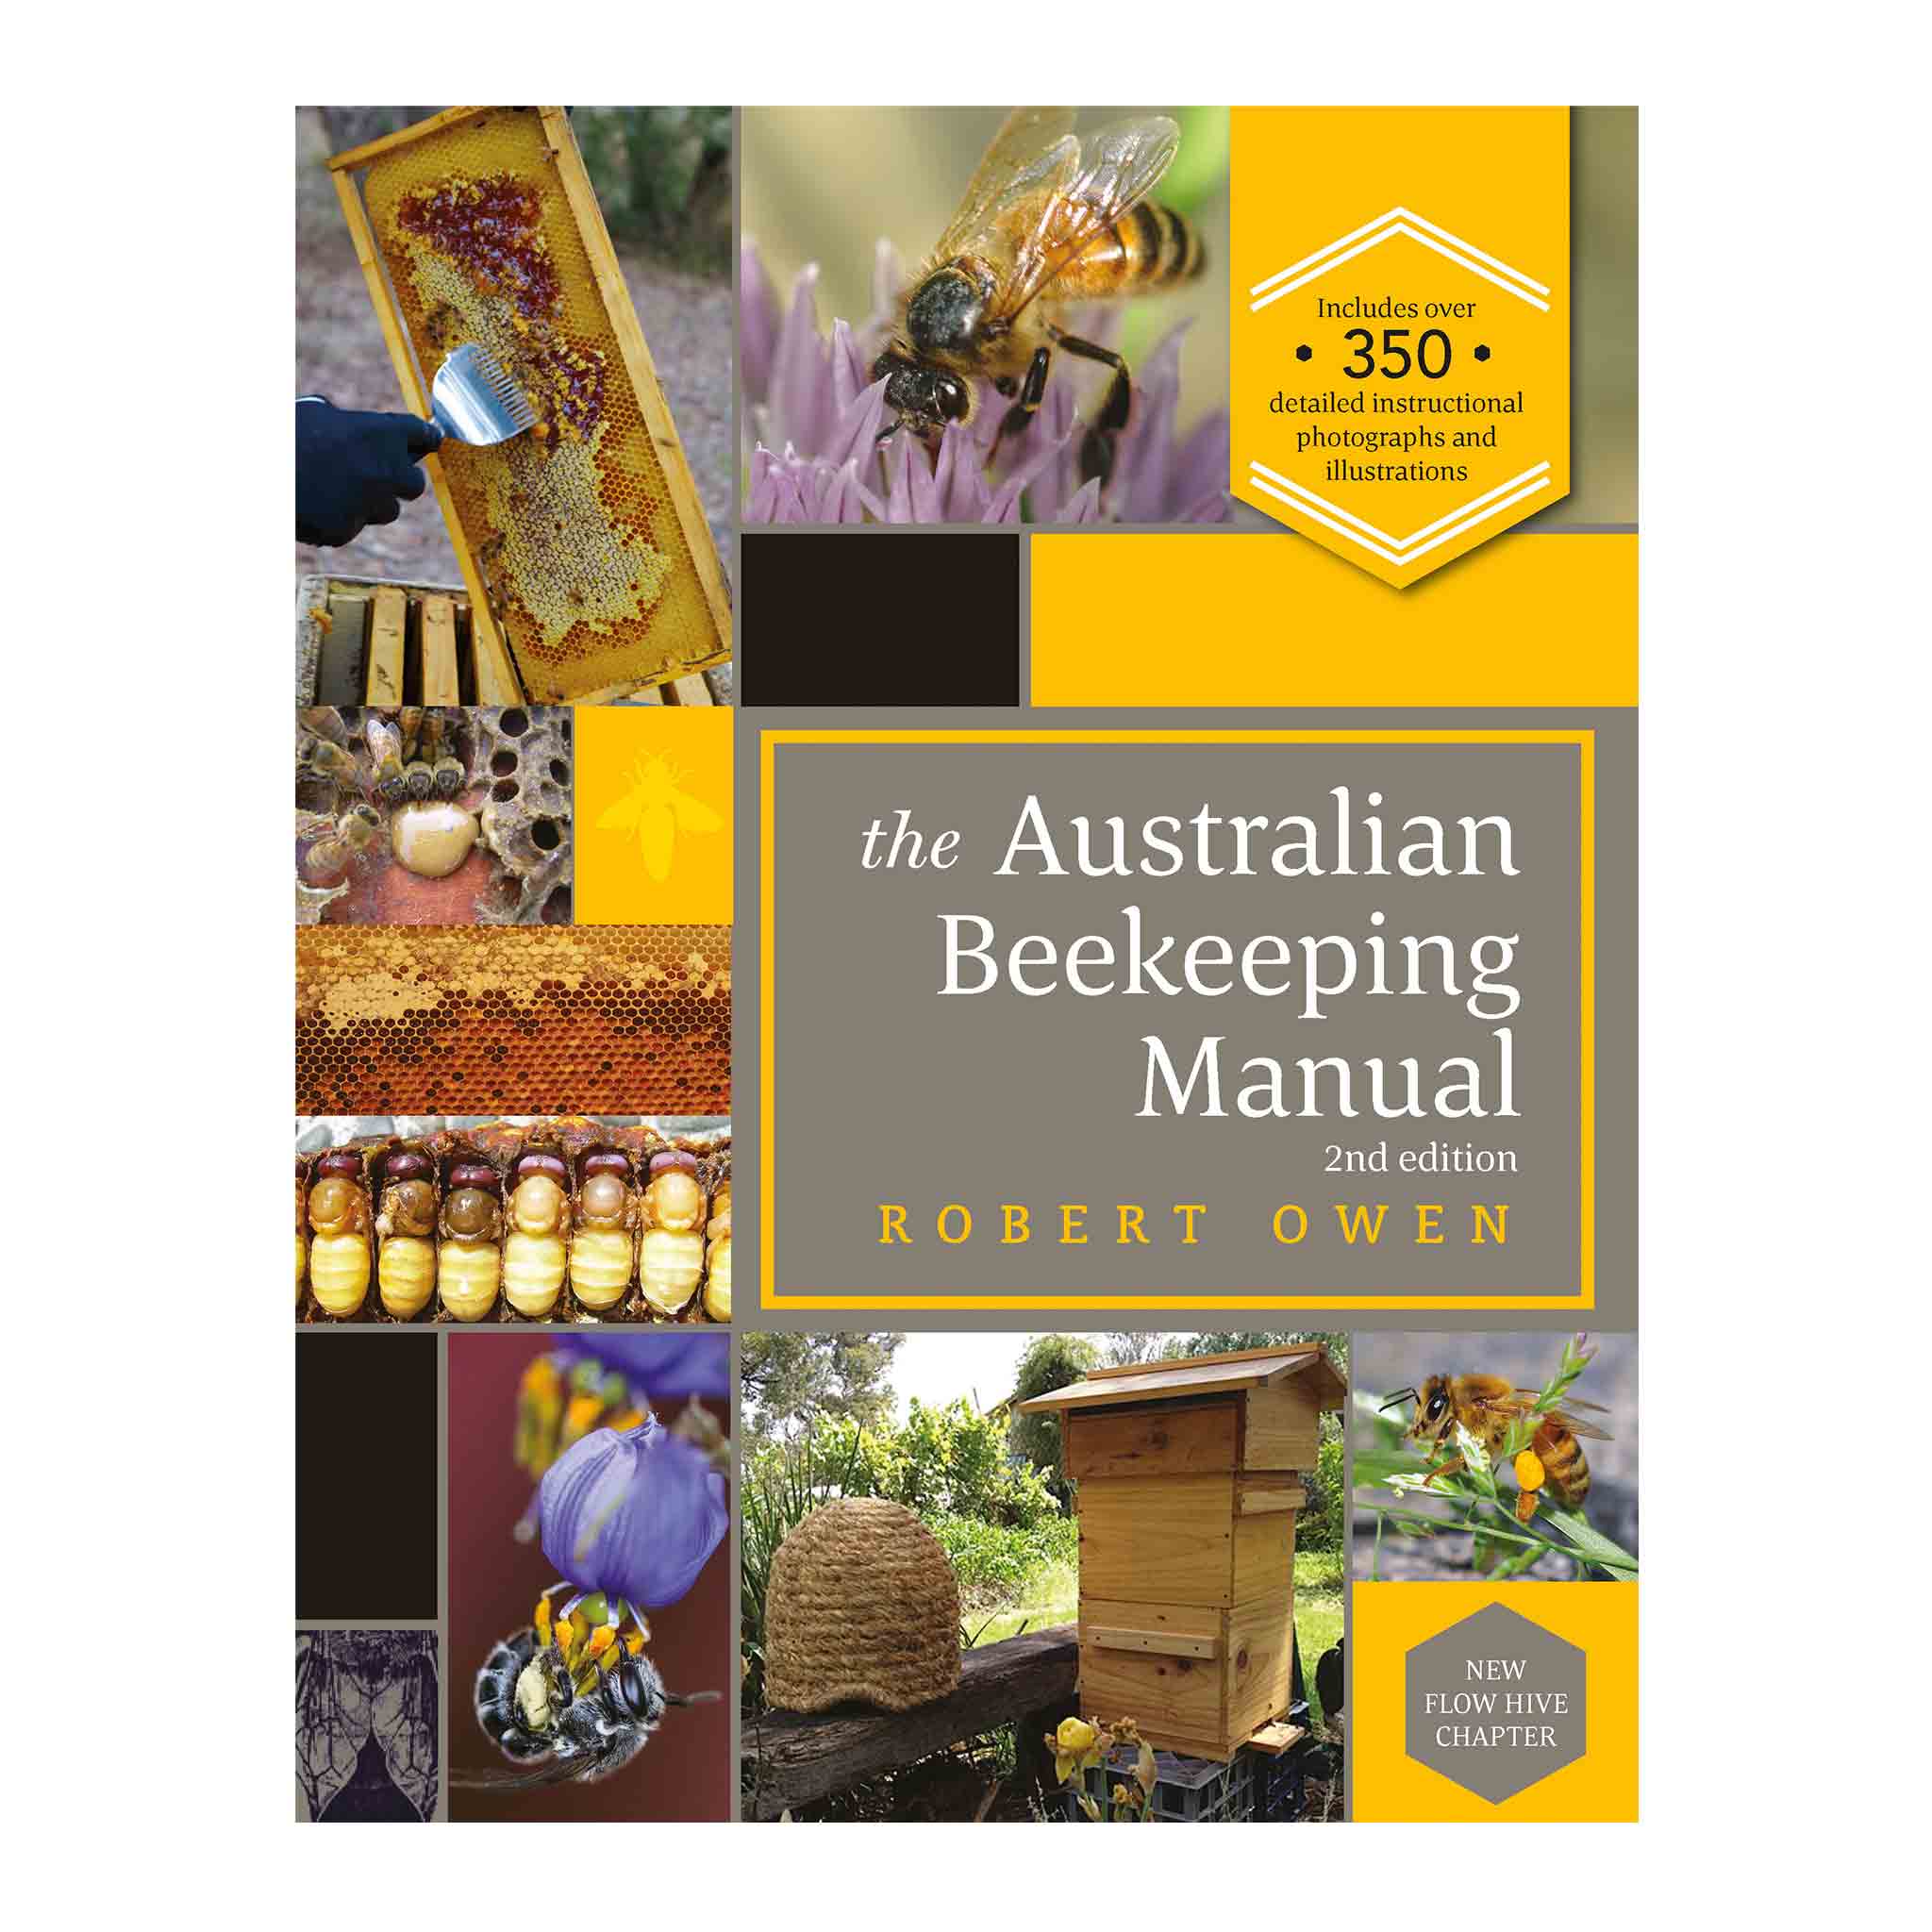 The Australian Beekeeping Manual - Latest 2nd edition (author Robert Owen) - Books collection by Buzzbee Beekeeping Supplies